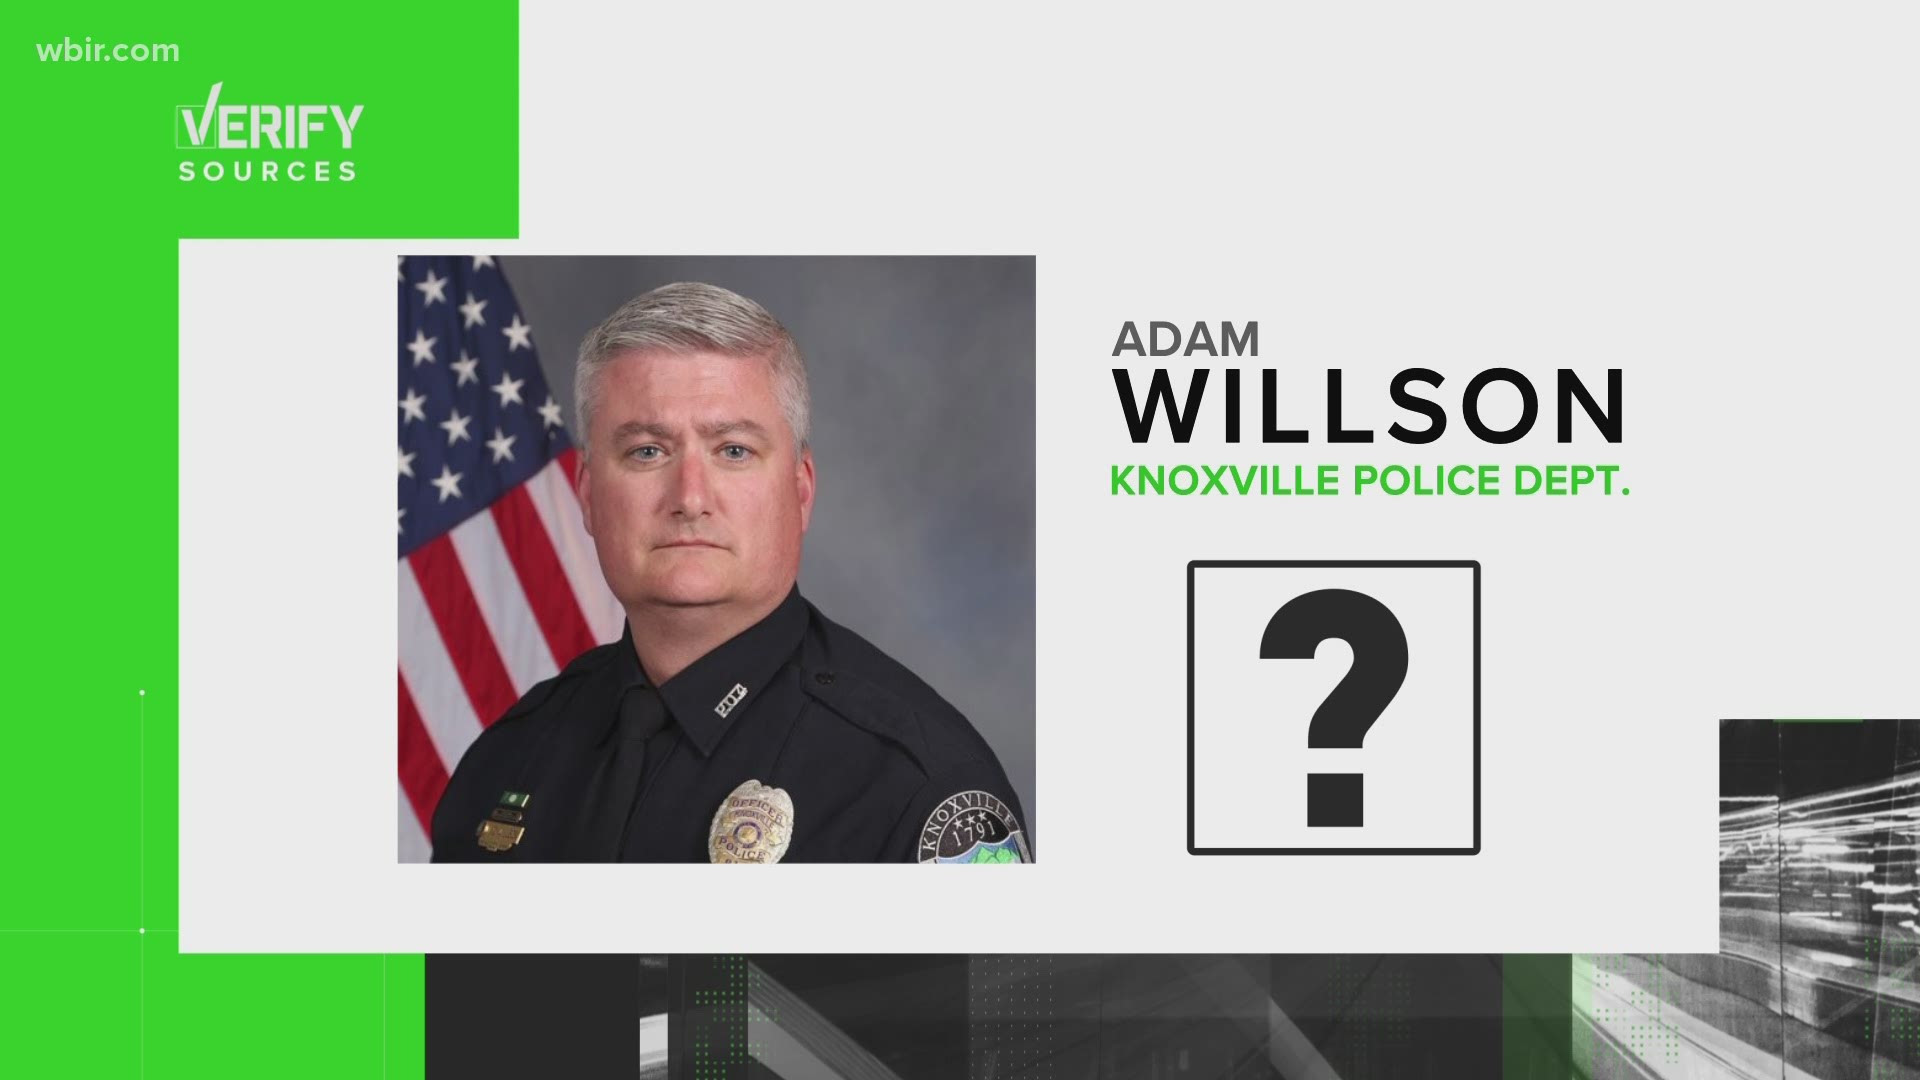 Many people online have questions about the shooting at Austin East High School, including whether Officer Adam Willson shot himself or was shot by a fellow officer.